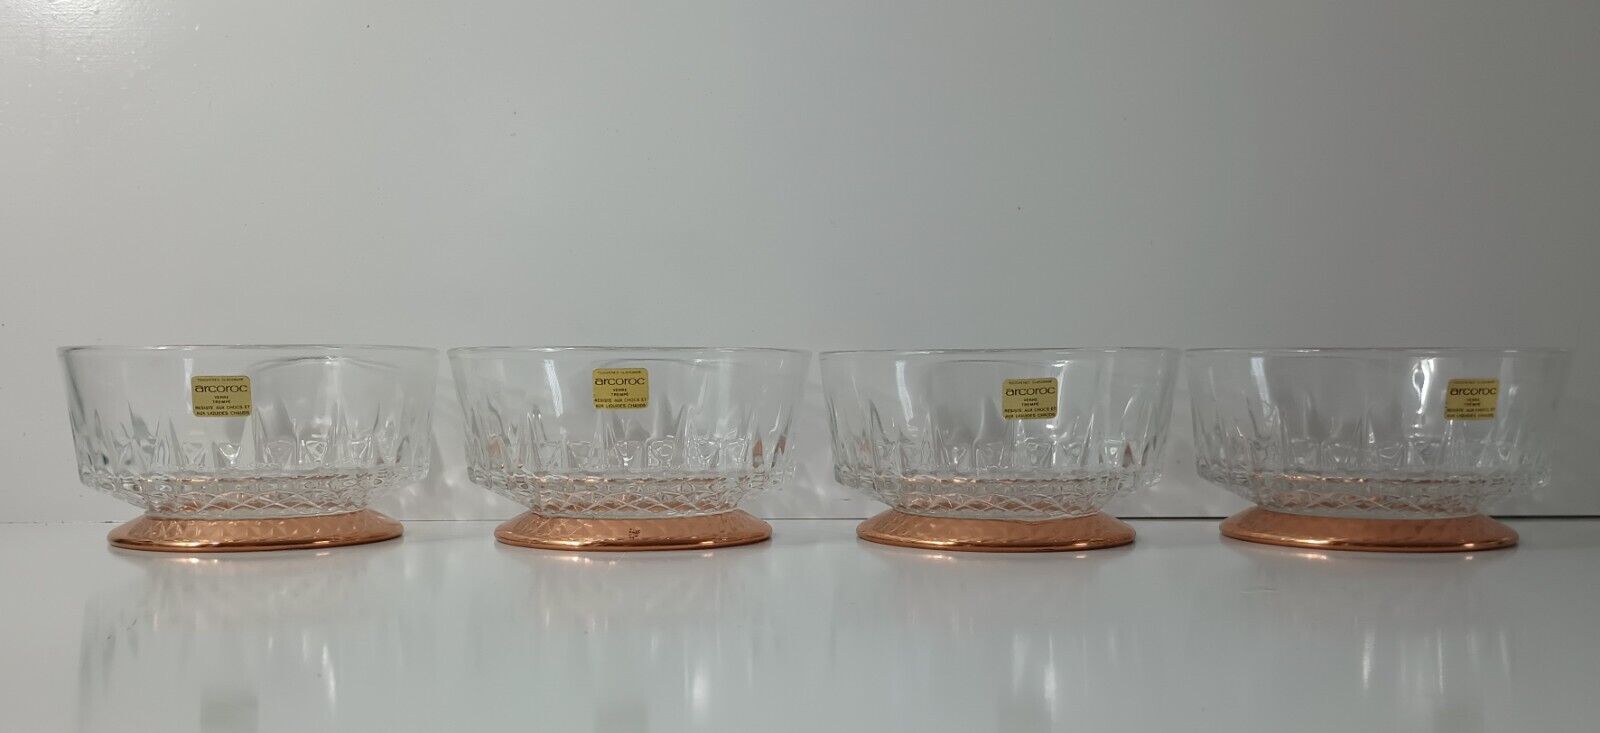 Arcoroc Bowls 4 Copper Craft Guild Toughened Glassware French Starburst NWT